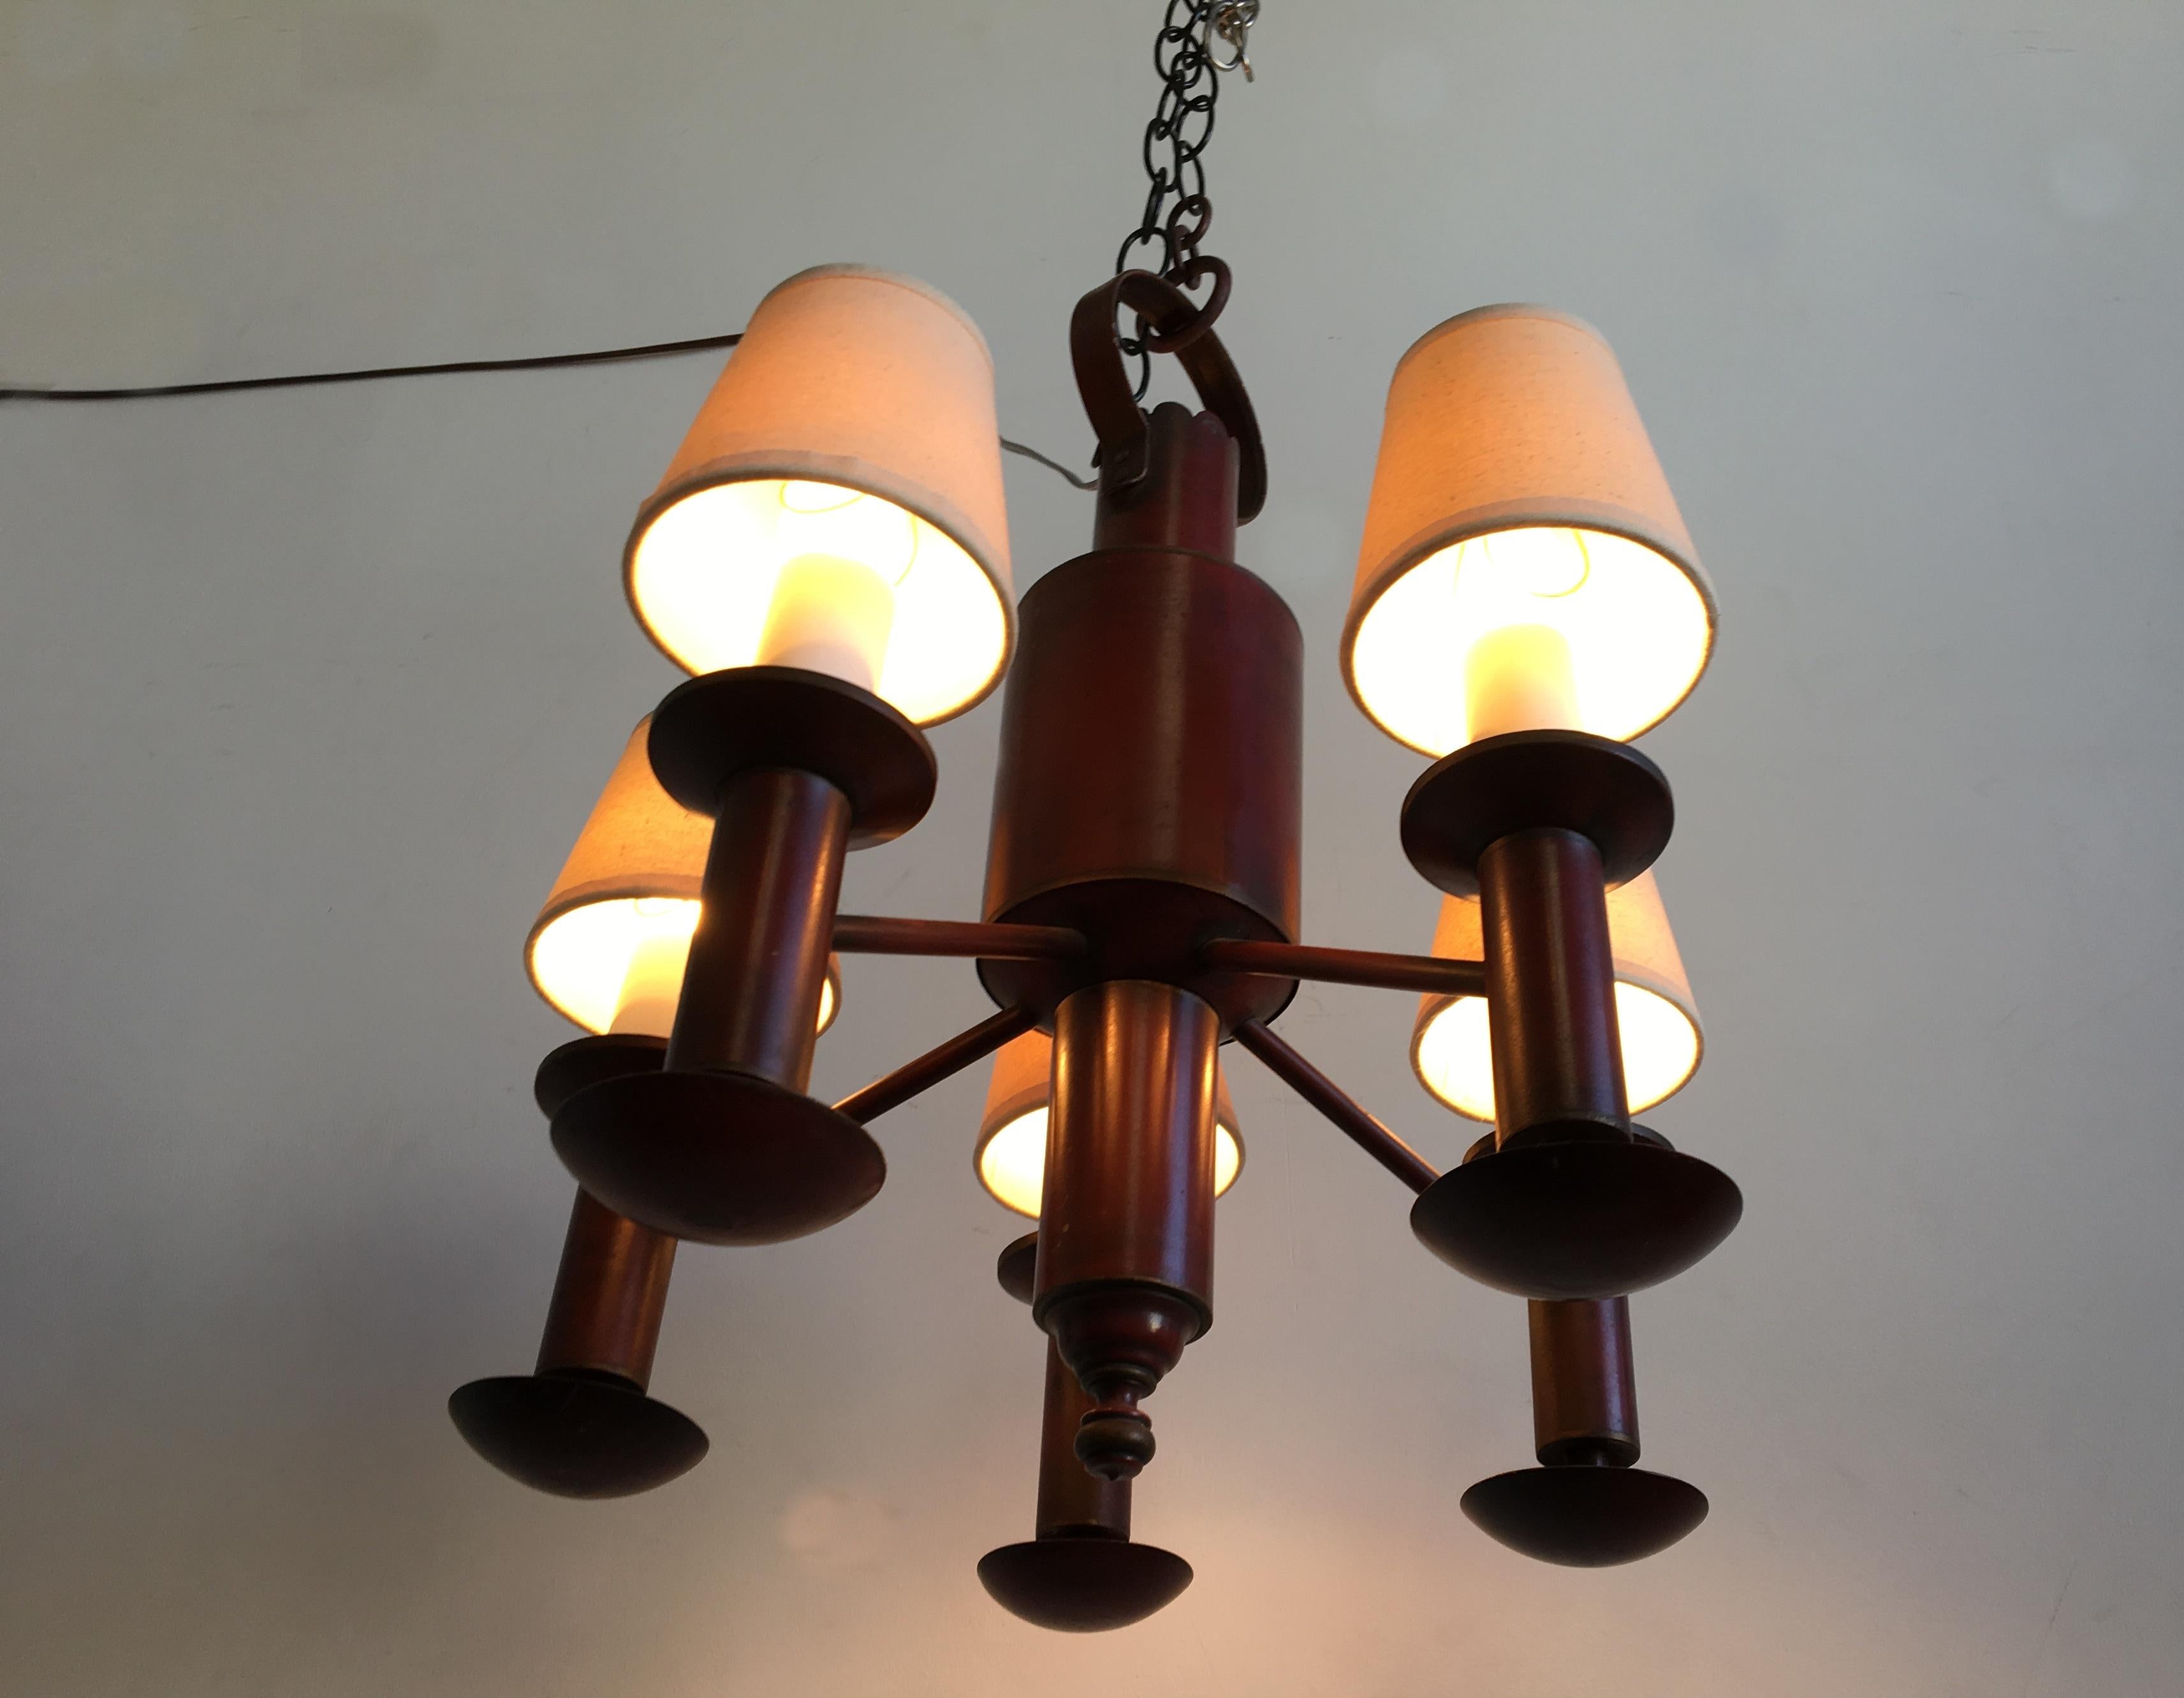 This rustic style chandelier made in the 1940s has a 5-arm candelabra with cream shades. It is made of metal in a deep, brick patinated red color.
It gives a very warm light!
   